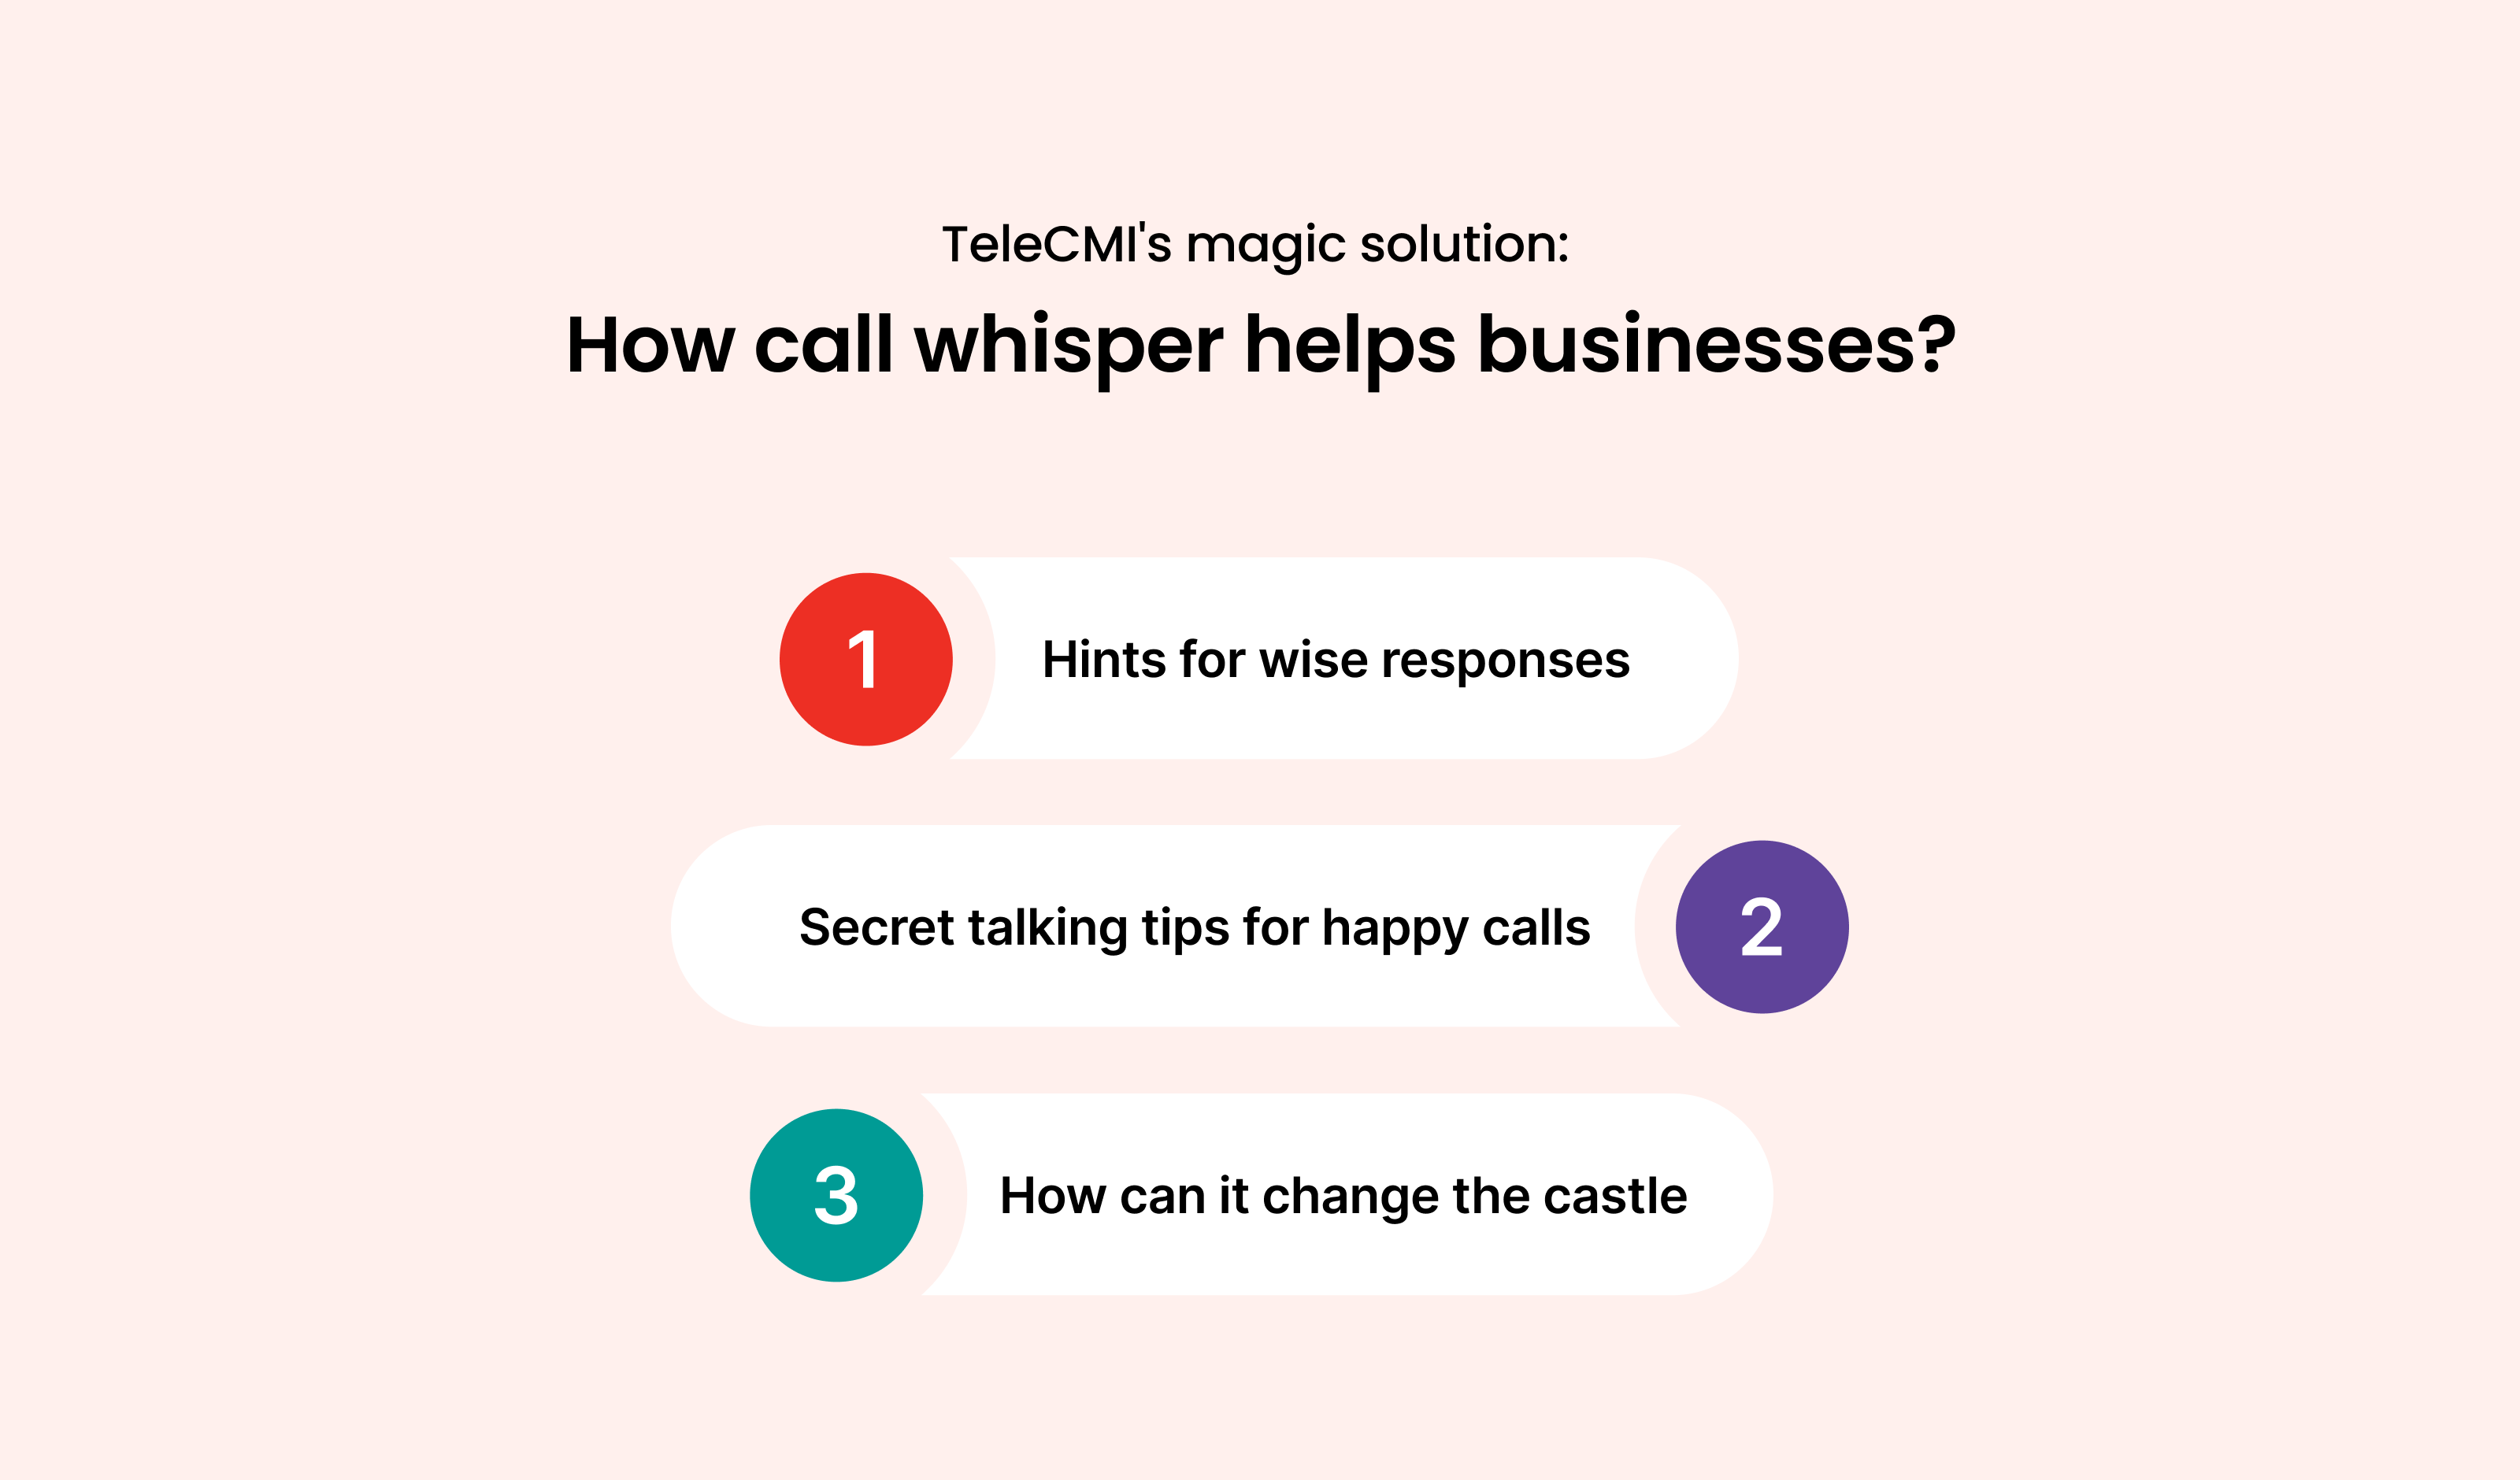 TeleCMI's Magic Solution: How Call Whispering Helps Businesses Talk Better